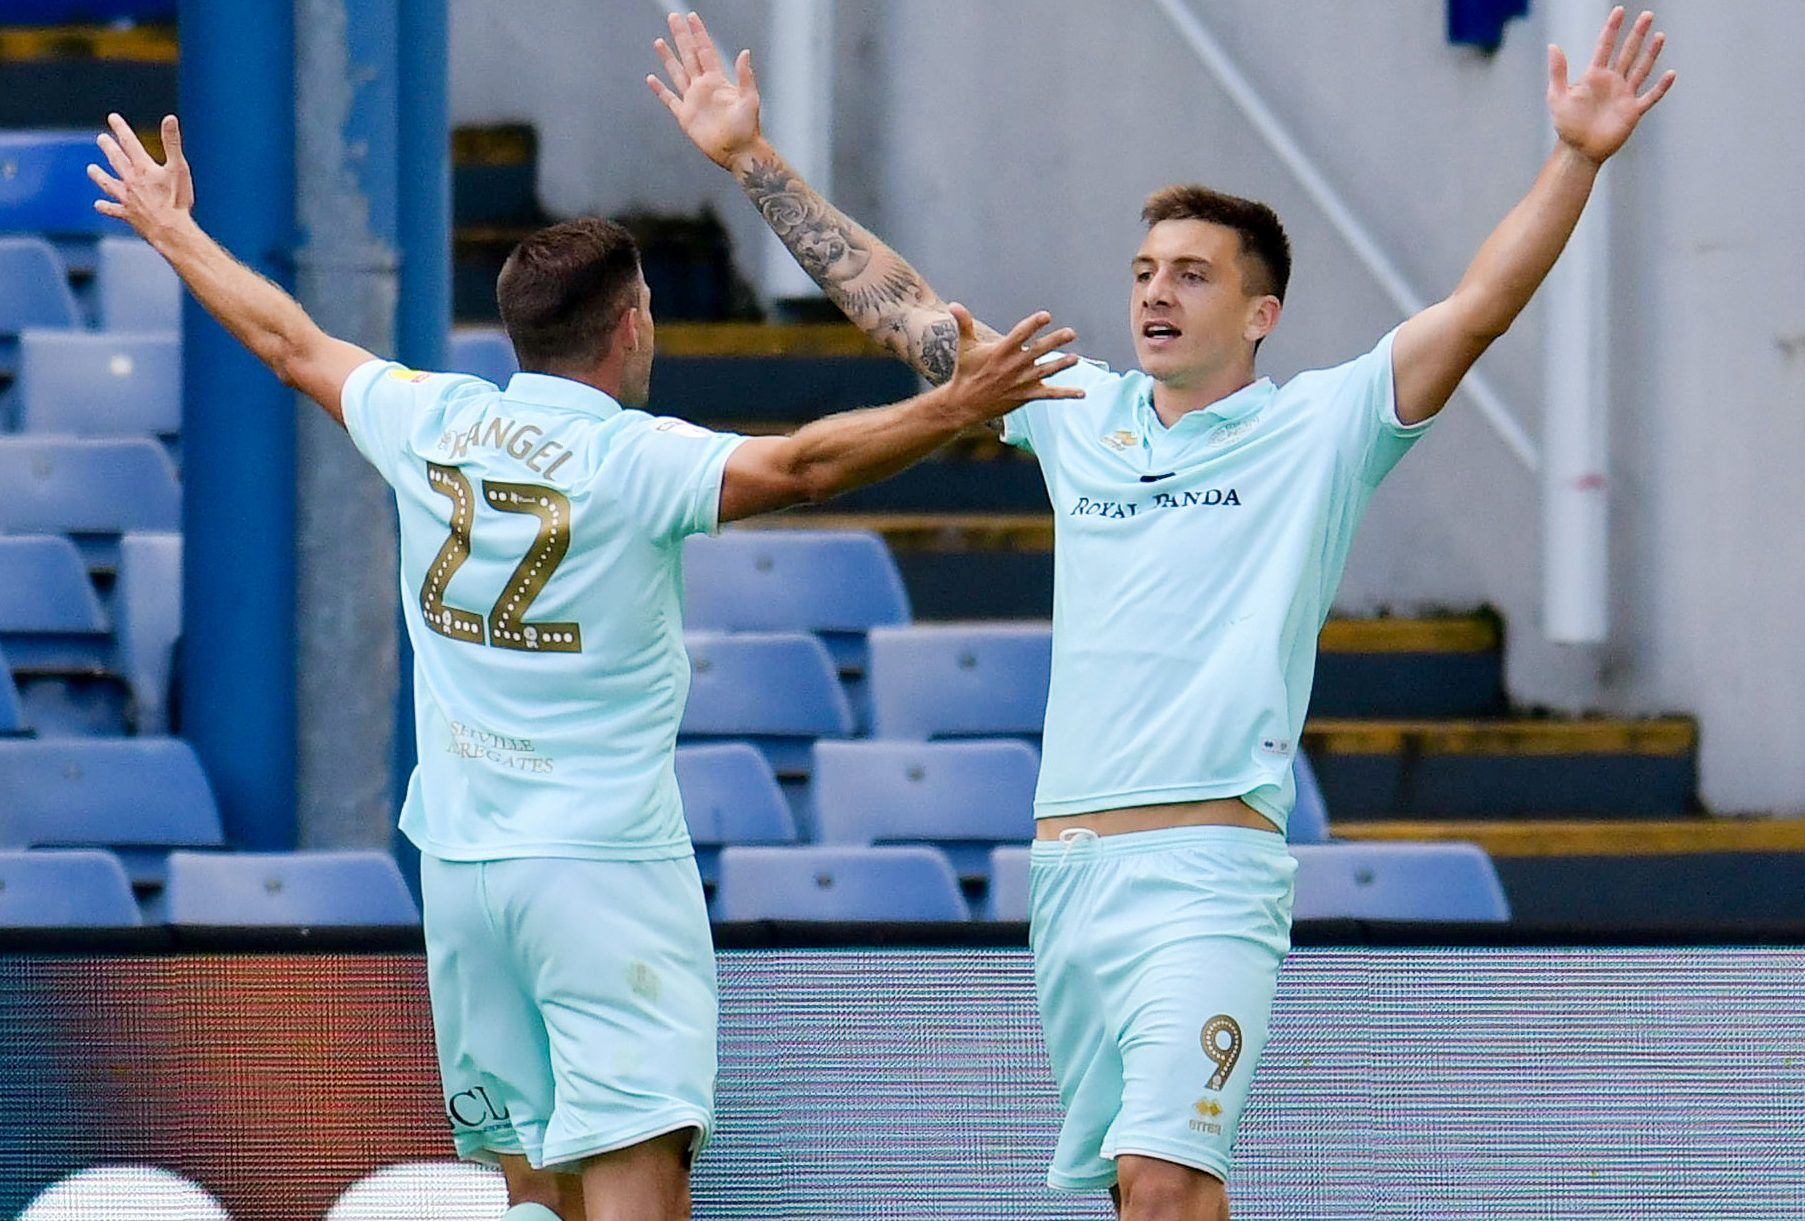 Soccer Football - Championship - Sheffield Wednesday v Queens Park Rangers - Hillsborough, Sheffield, Britain - August 31, 2019   Queens Park Rangers' Jordan Hugill celebrates scoring their first goal with Angel Rangel   Action Images/Paul Burrows    EDITORIAL USE ONLY. No use with unauthorized audio, video, data, fixture lists, club/league logos or 